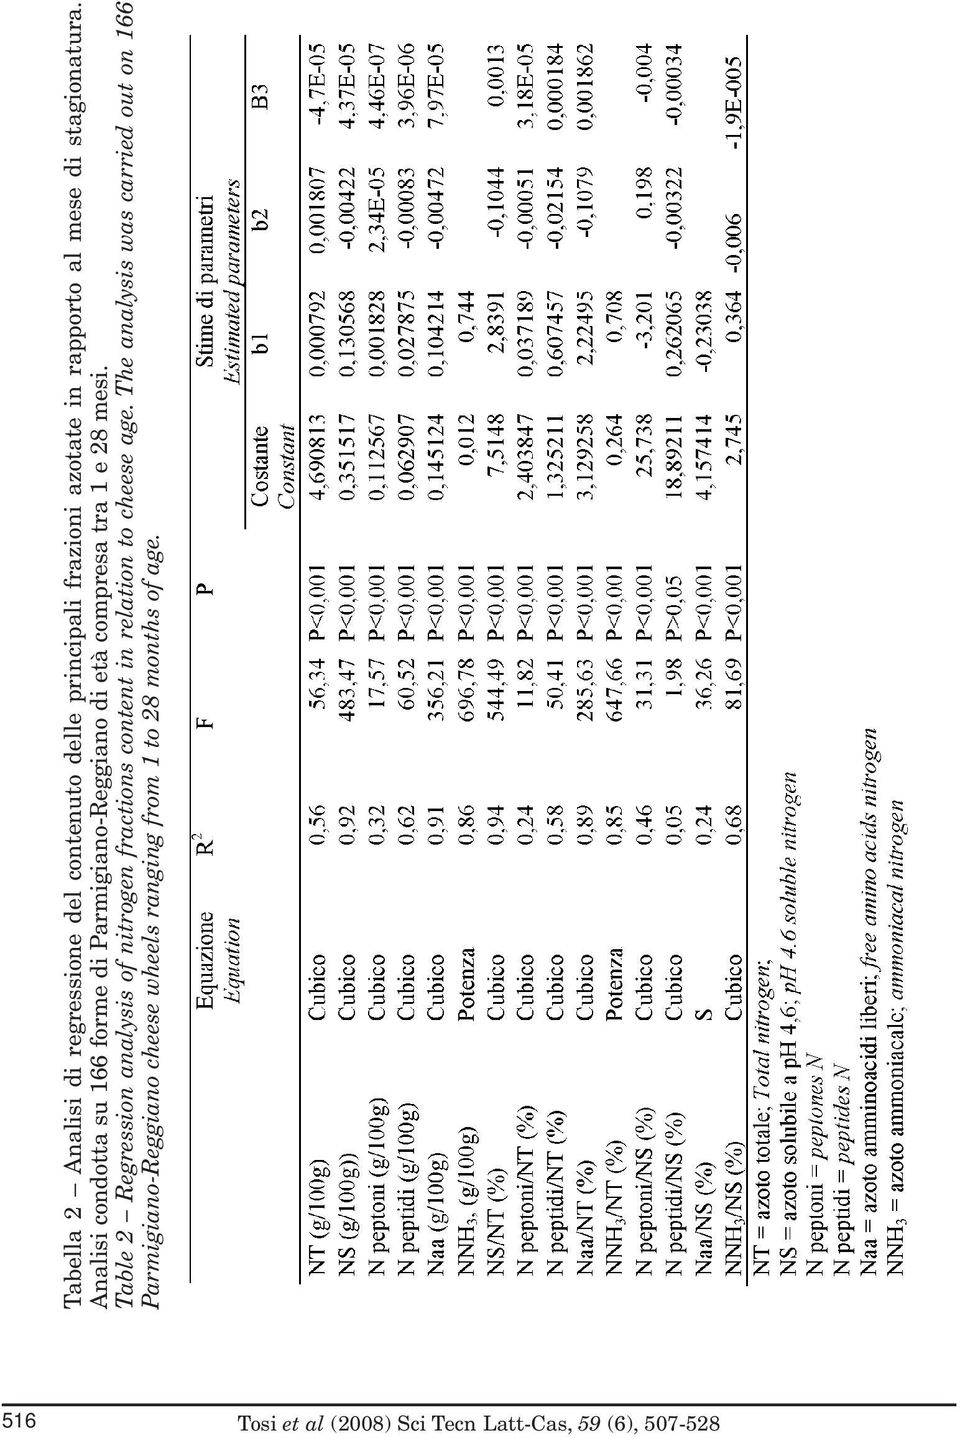 Table 2 Regression analysis of nitrogen fractions content in relation to cheese age.